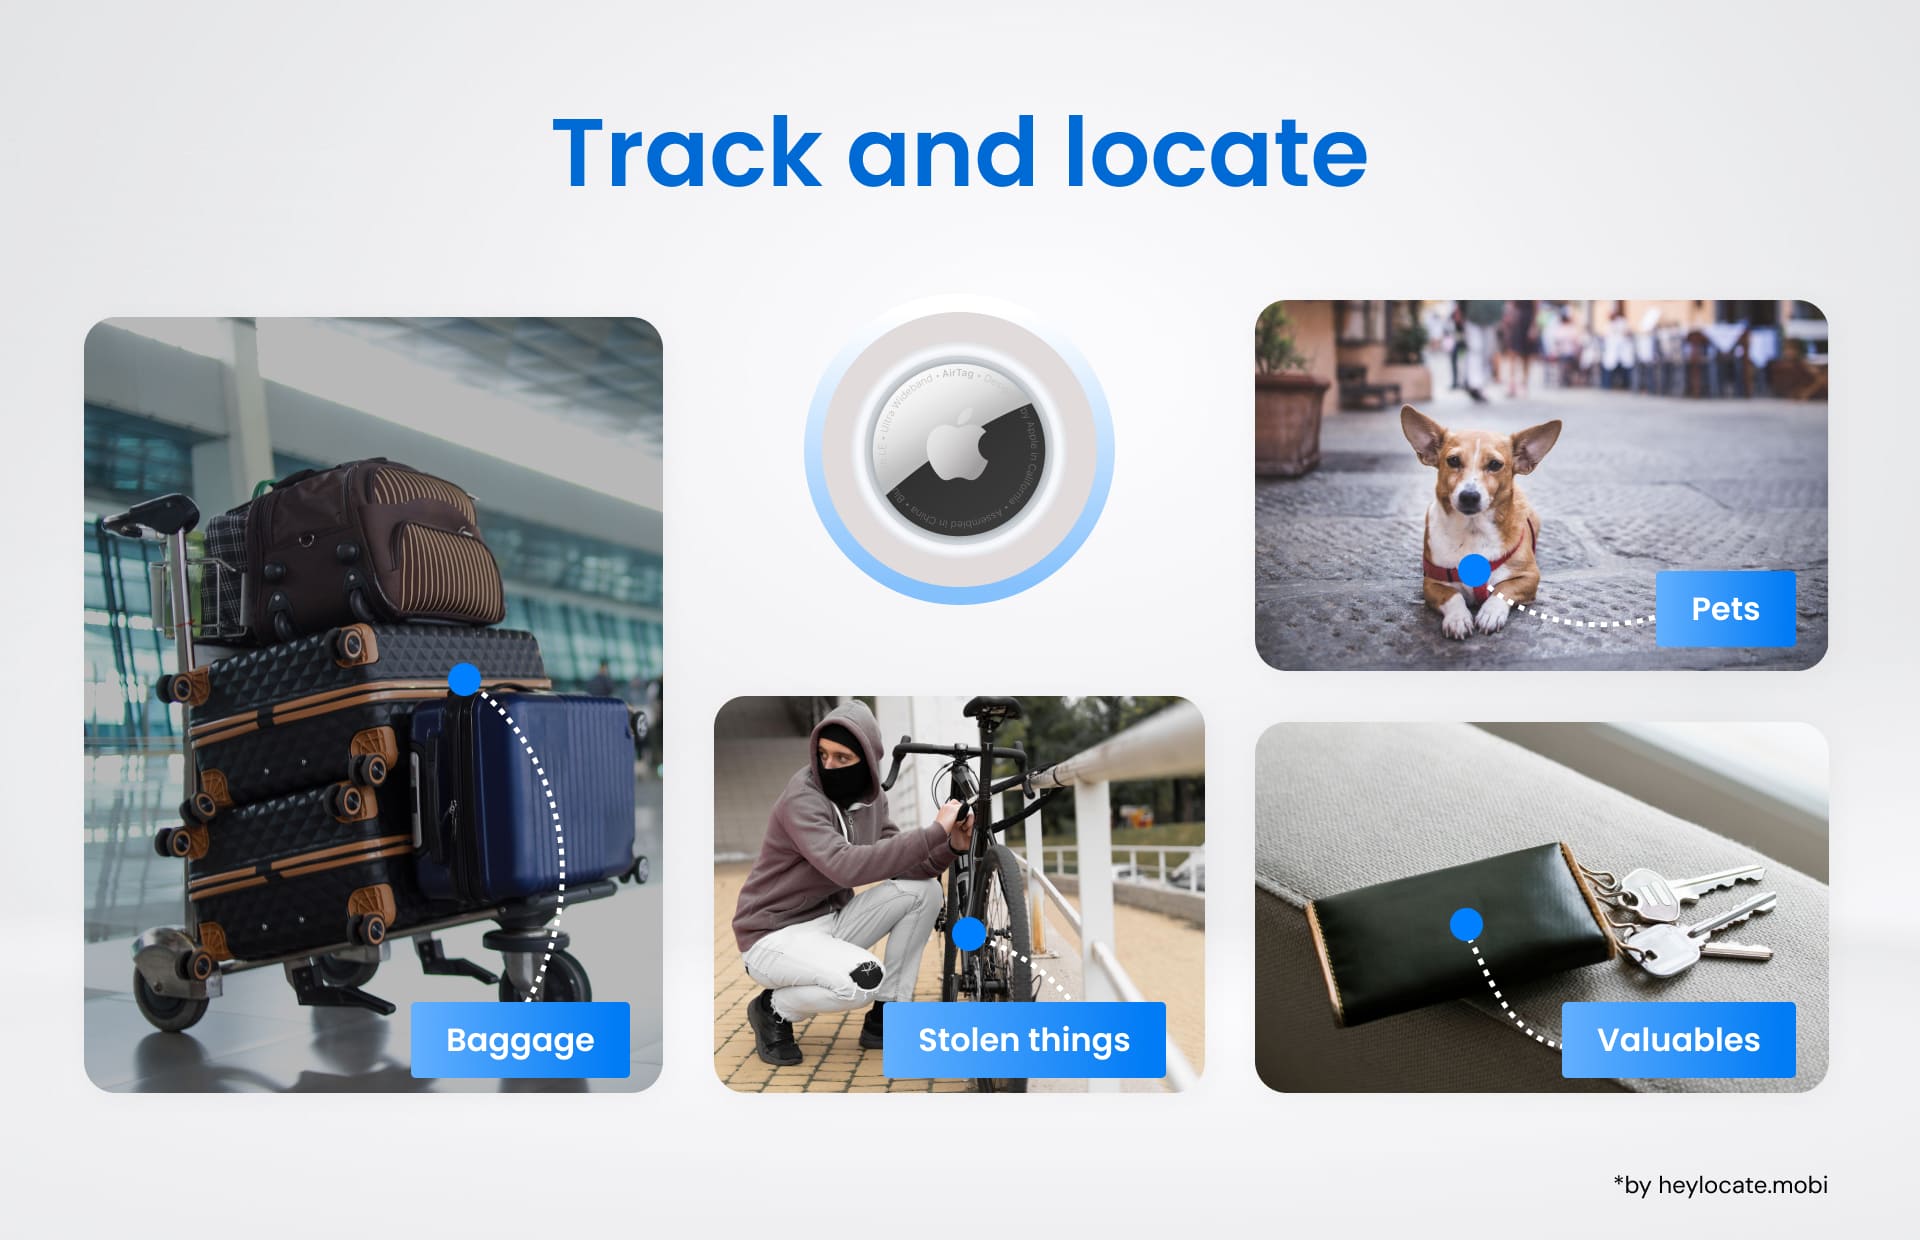 Examples of things that can be found with AirTag: pets, luggage, stolen items, valuables